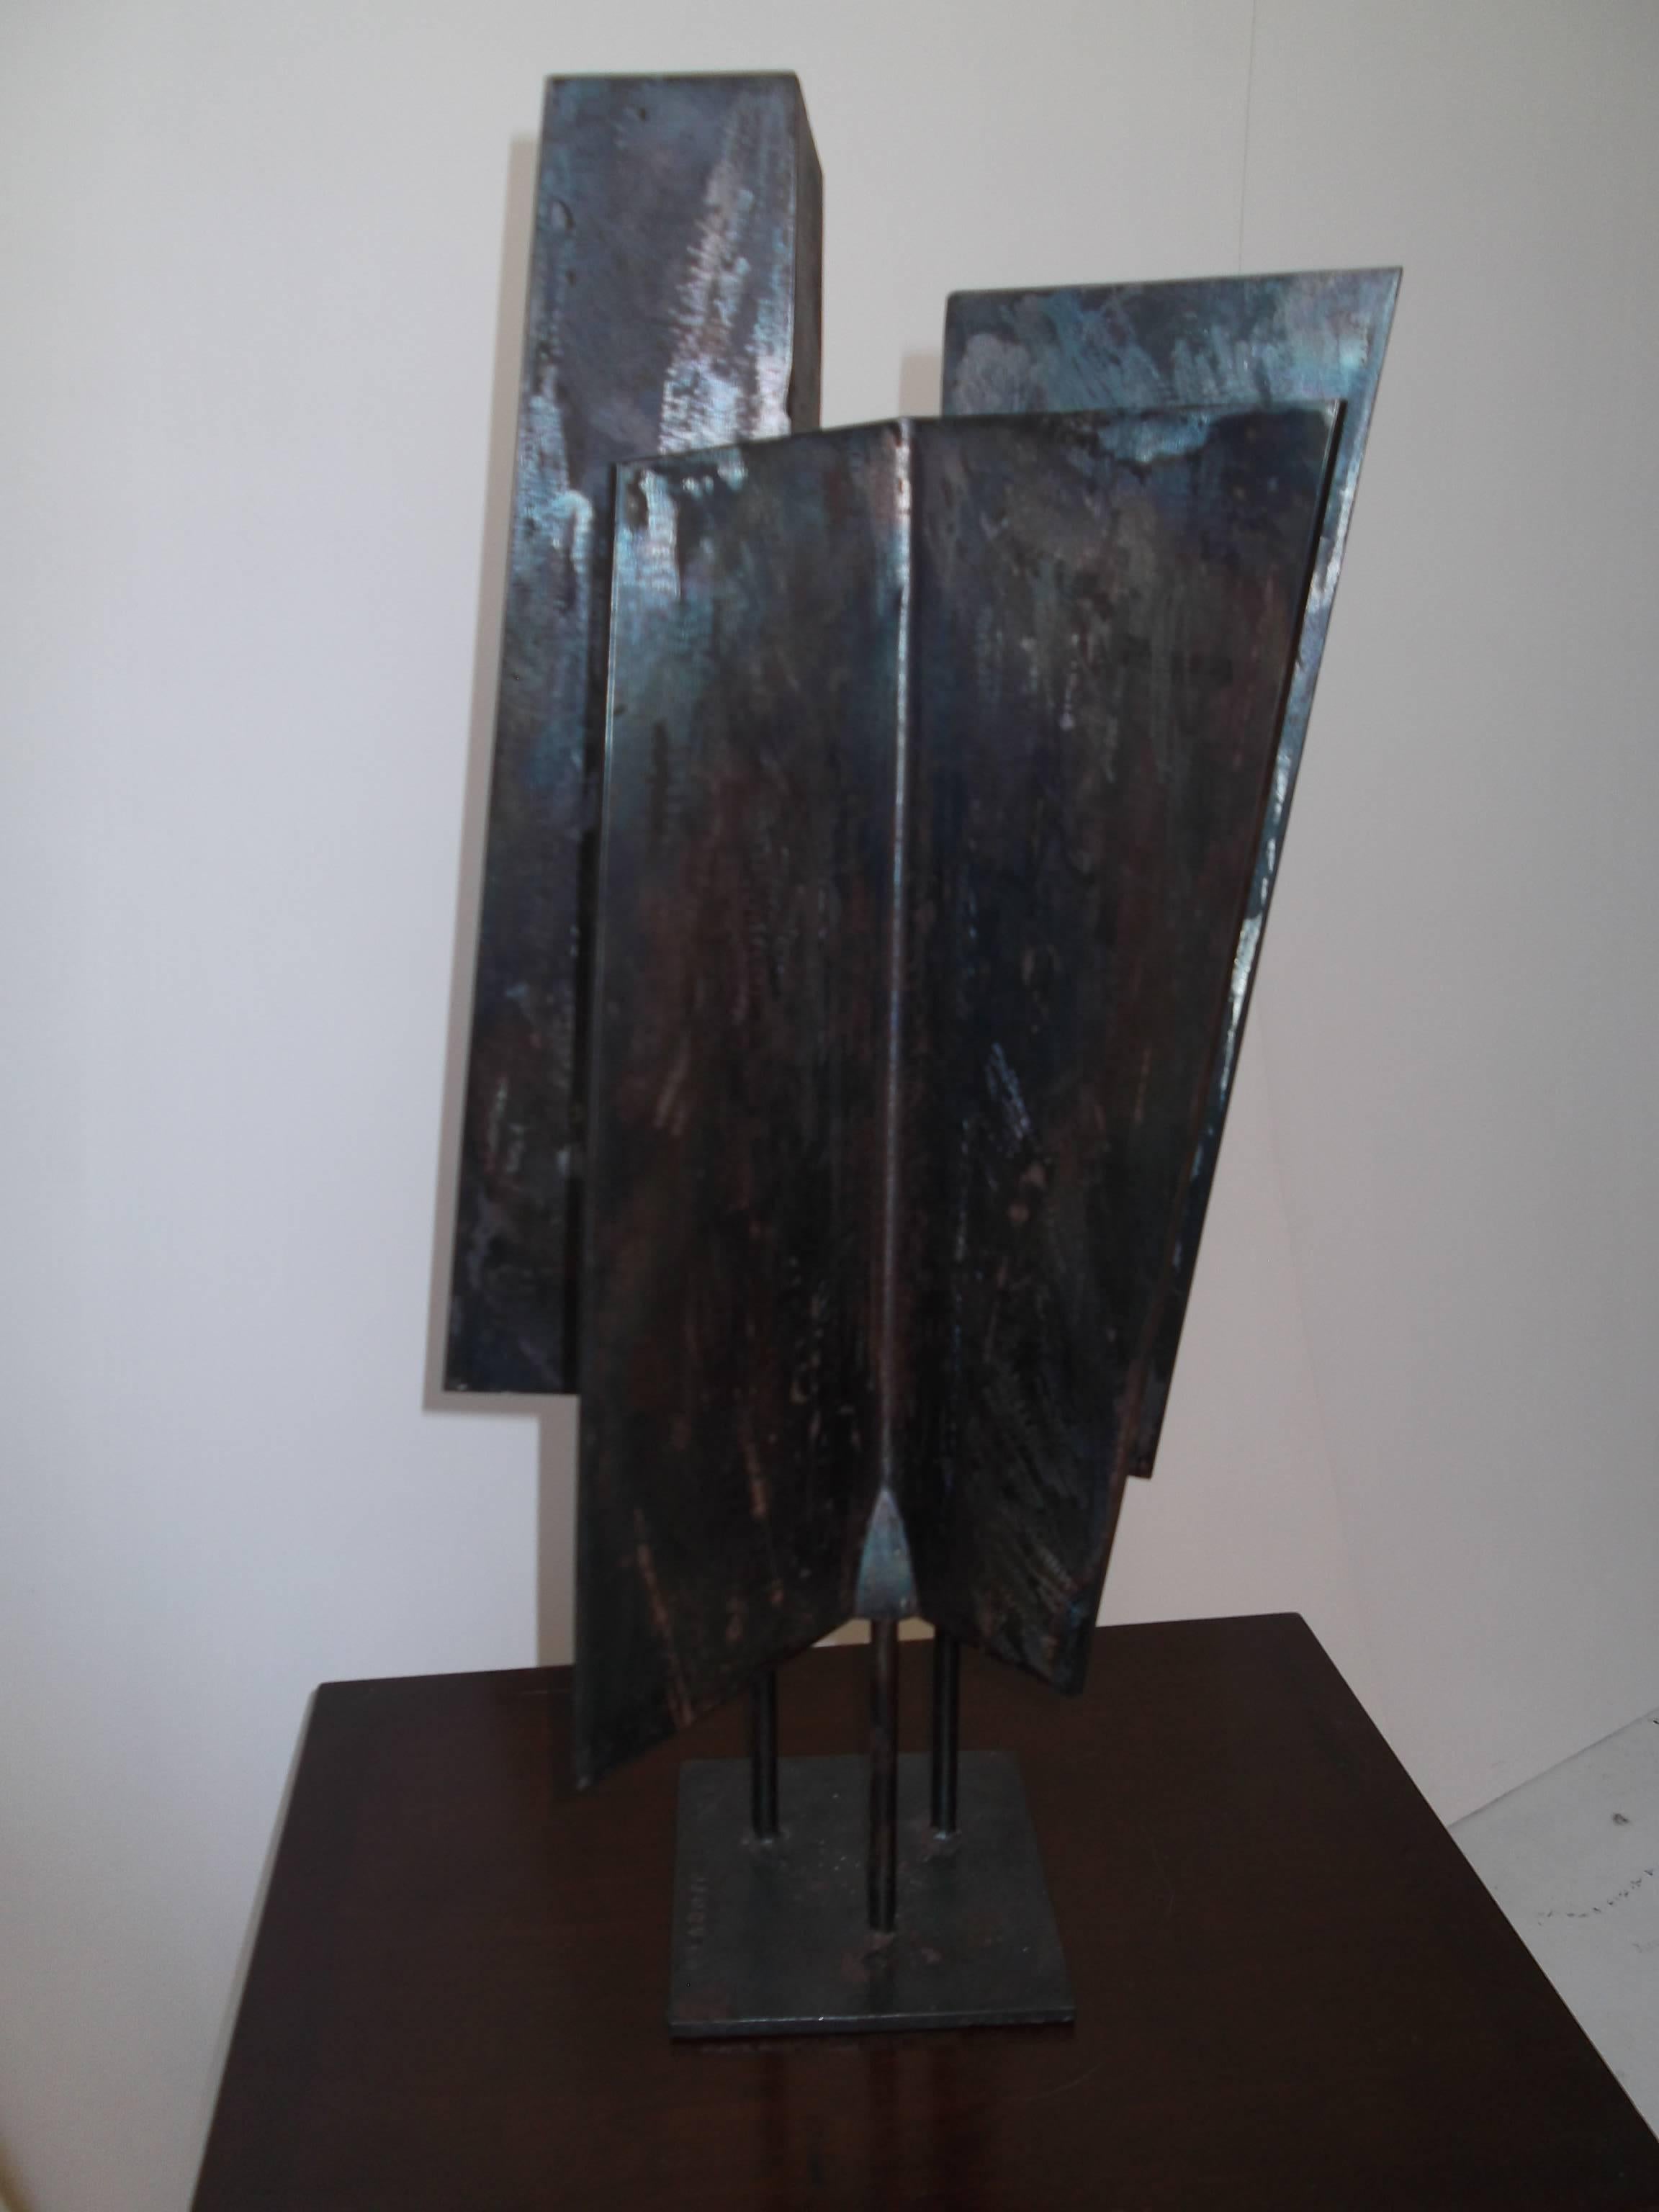 This is from a series of Triad Sculptures, signed and dated on the base, by the artist J. McVicker, dated 1963, and may be the first of this run by him, as noted on piece of tape to bottom as well. It is a nice vertical piece standing 23.5